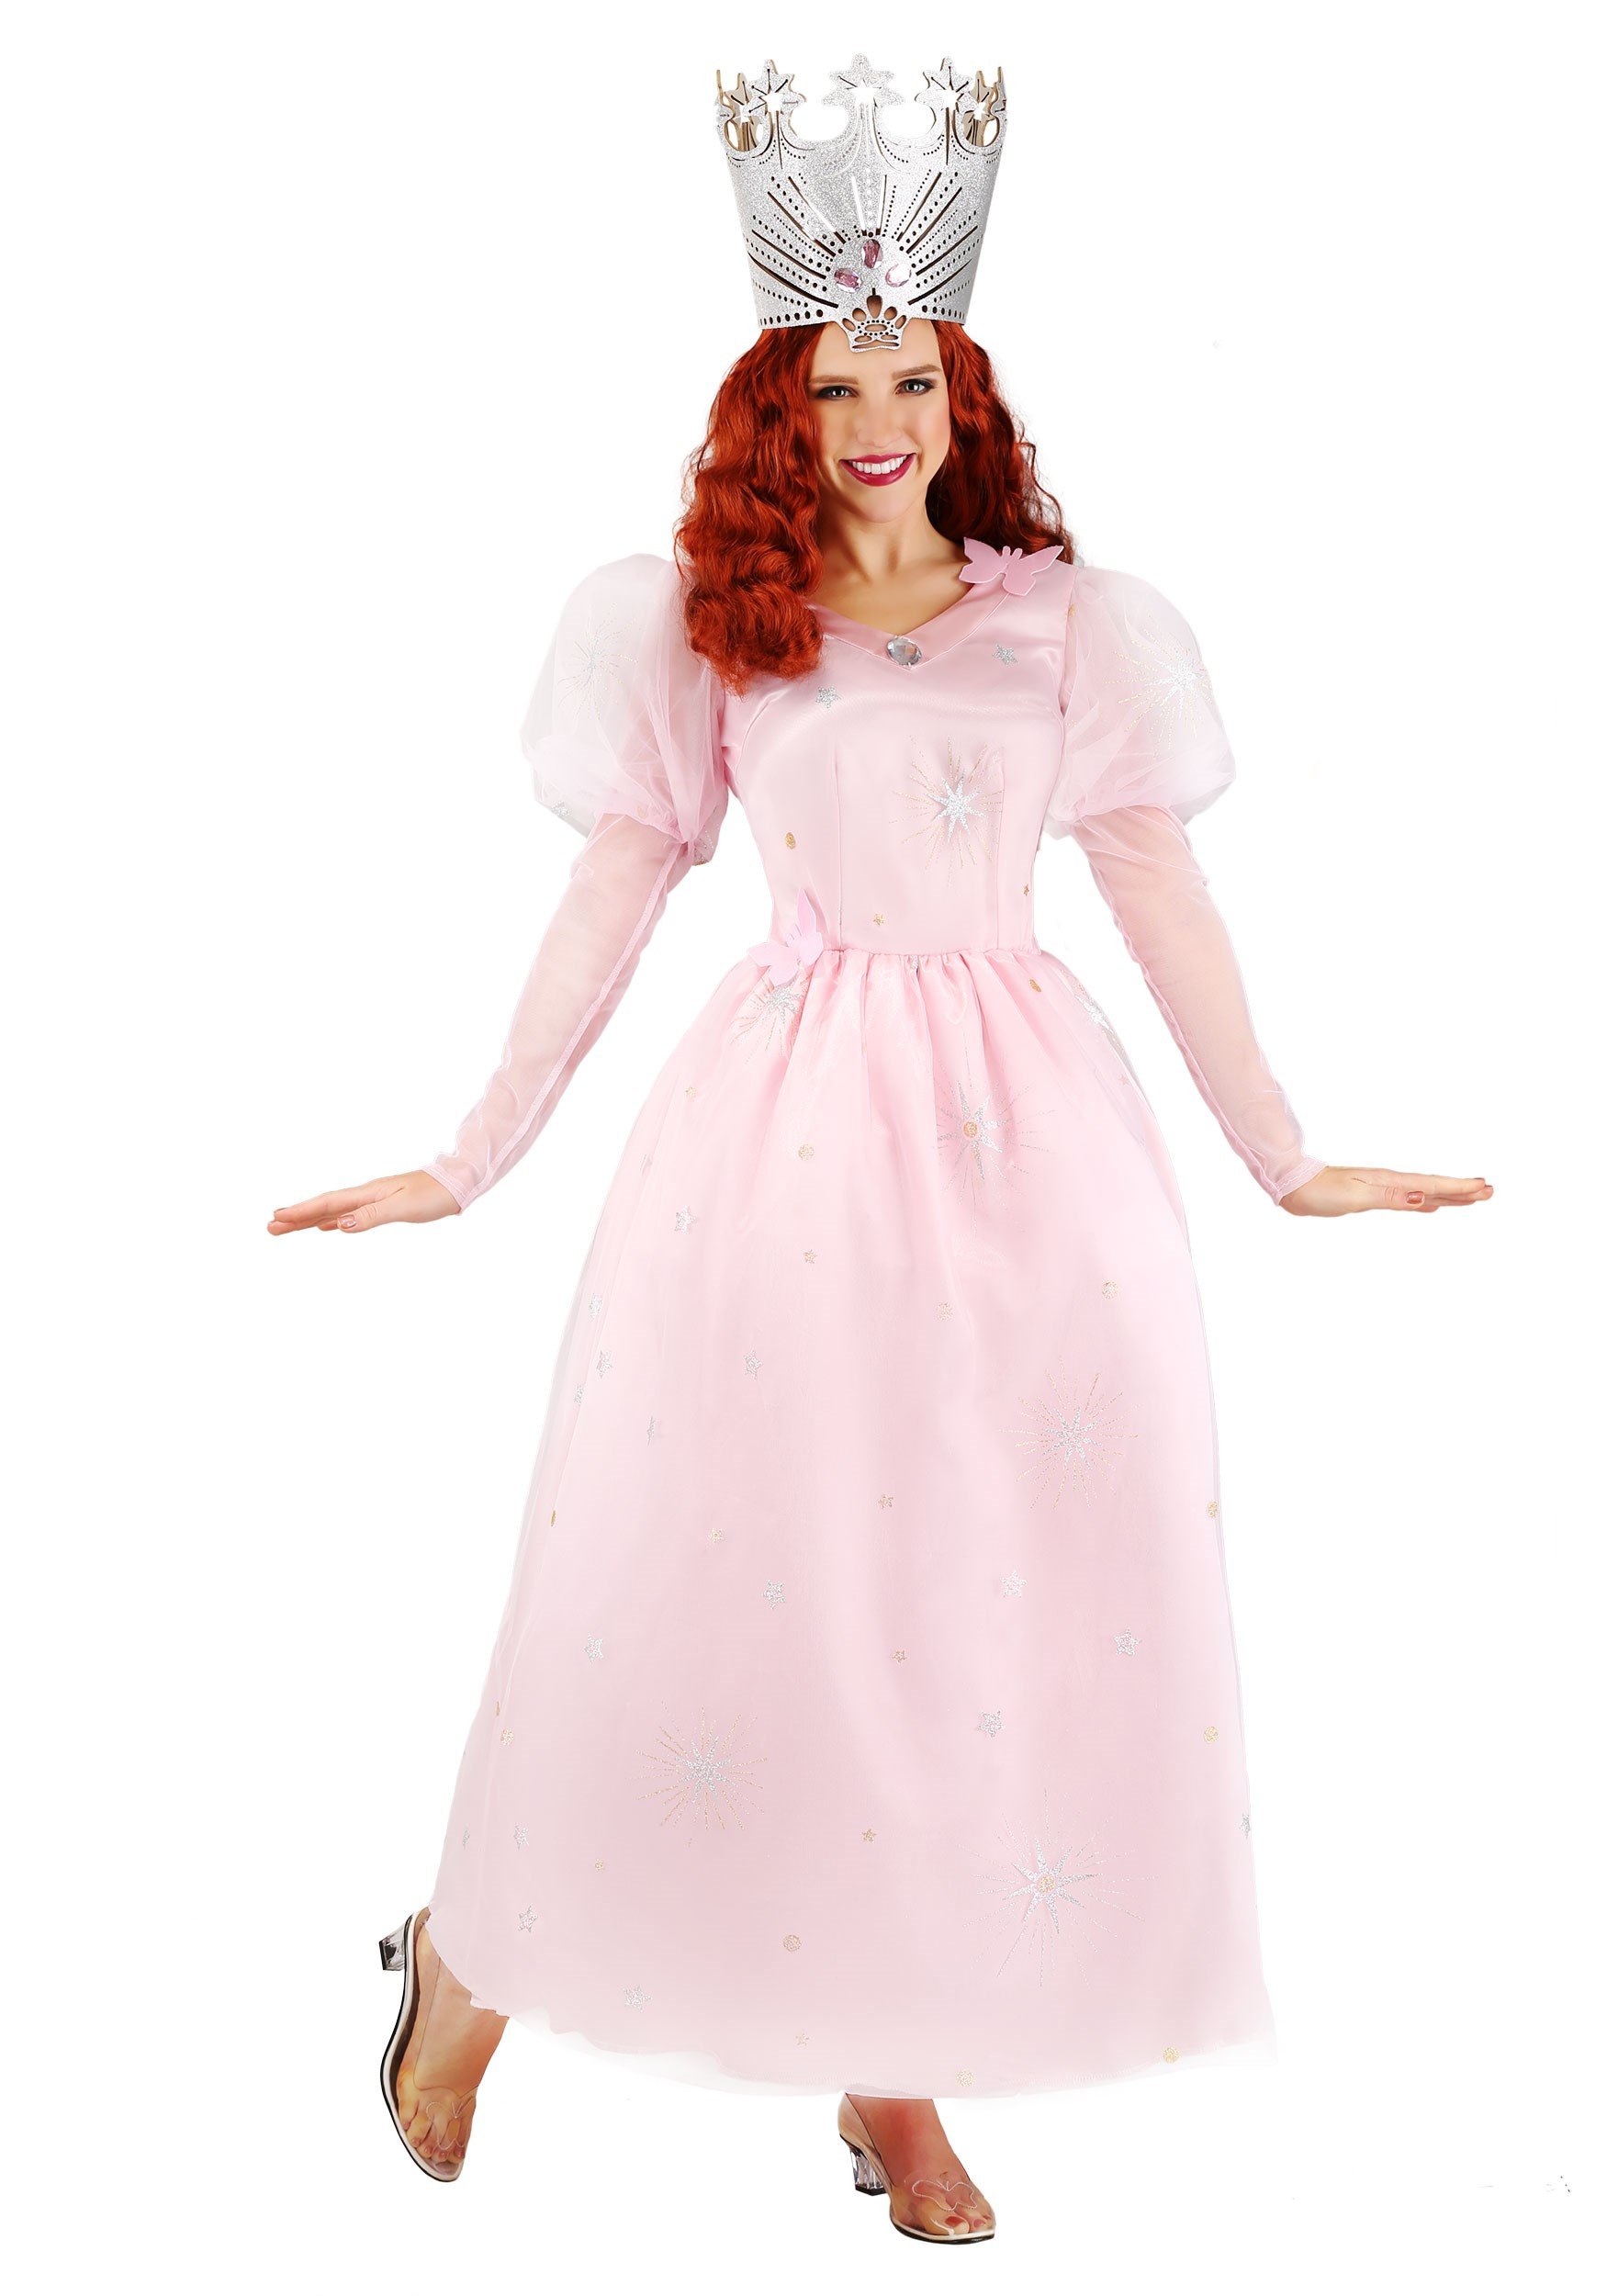 Photos - Fancy Dress Wizard Jerry Leigh  of Oz Glinda Adult Plus Size Costume Pink/Gray FUN1 